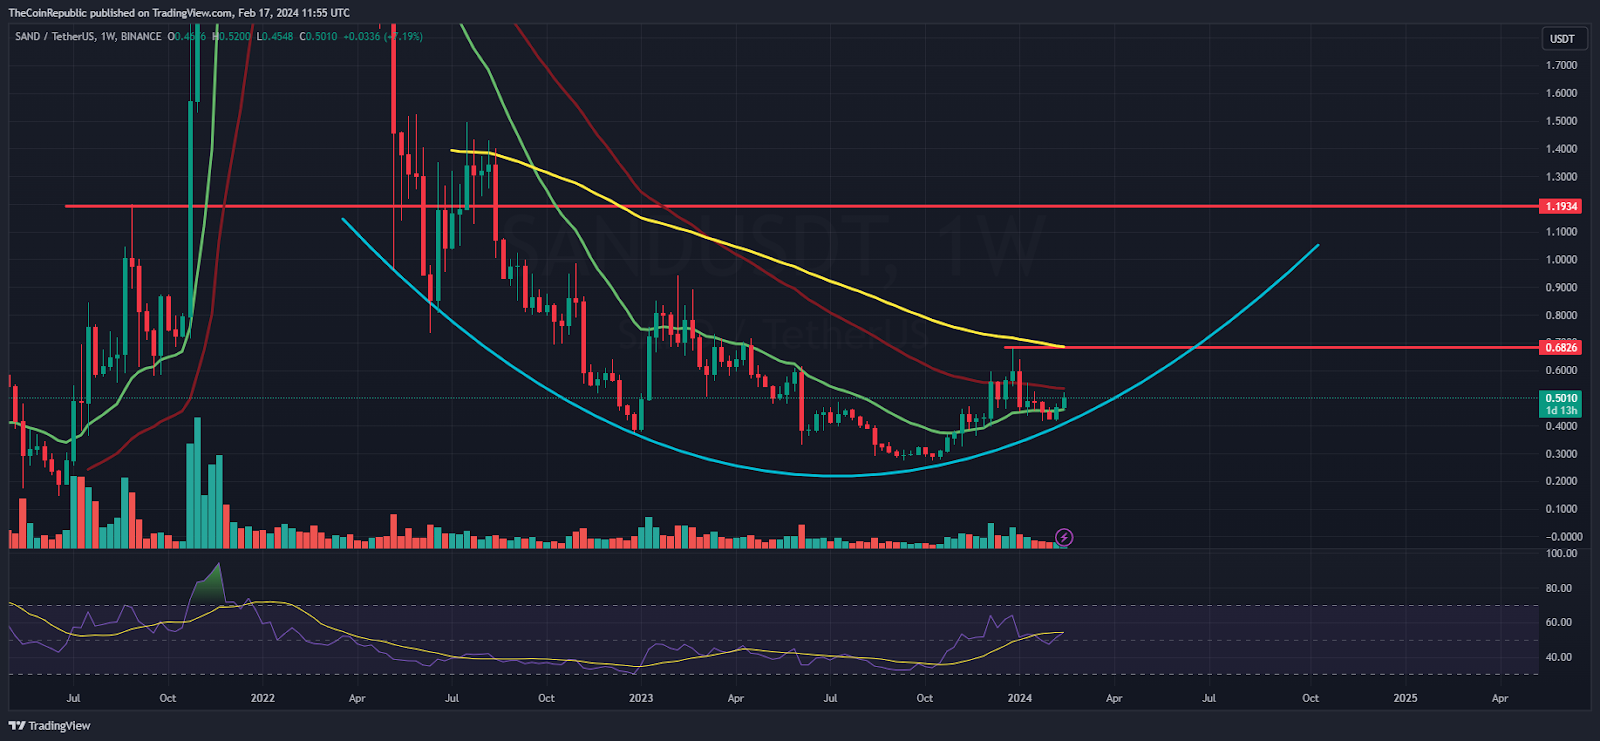 SAND Token Noted a Reversal; Will It Retain the Upside of $0.7000?